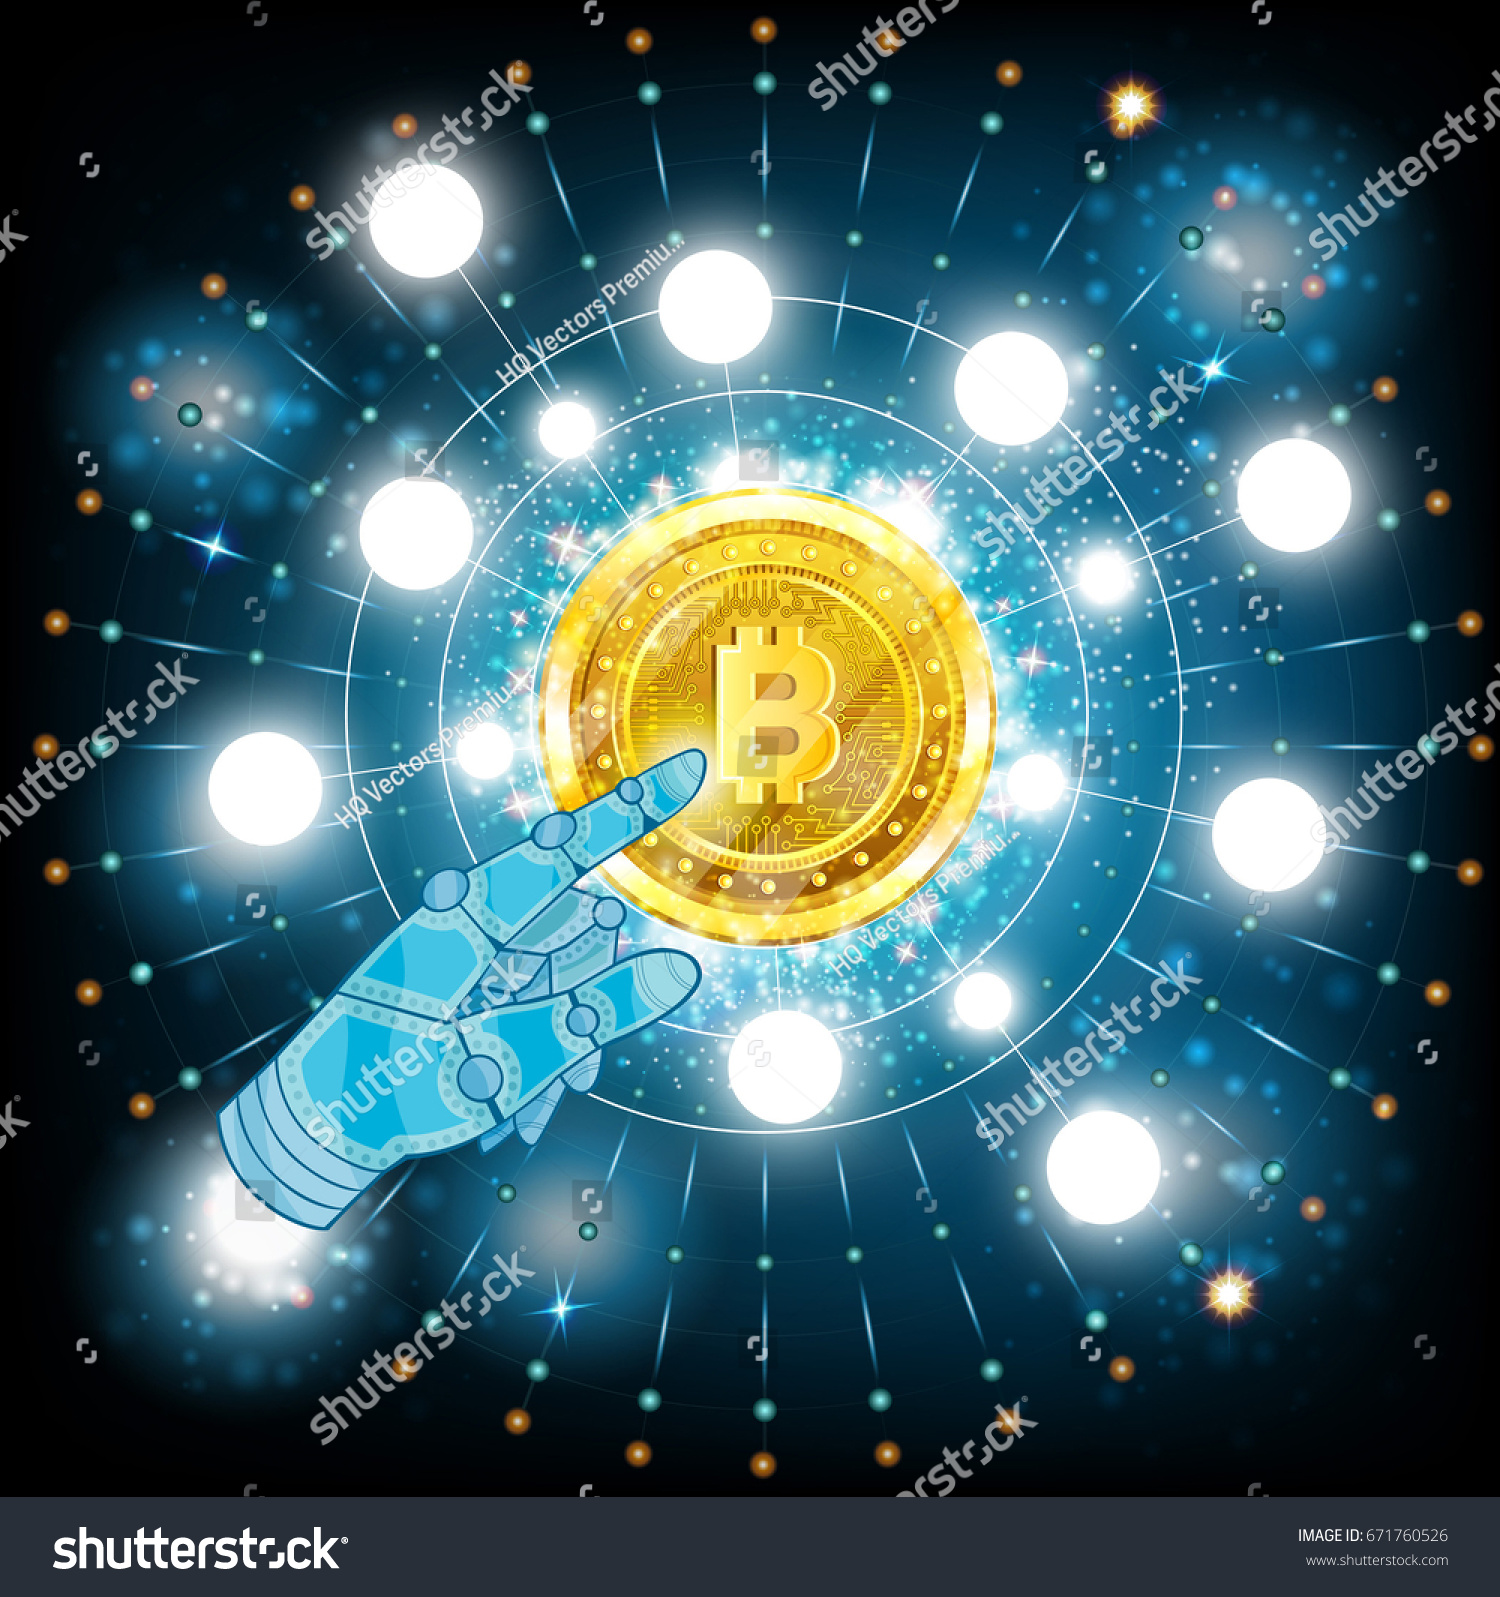 SVG of Virtual high tech construction or graphic with golden bit coin in center svg